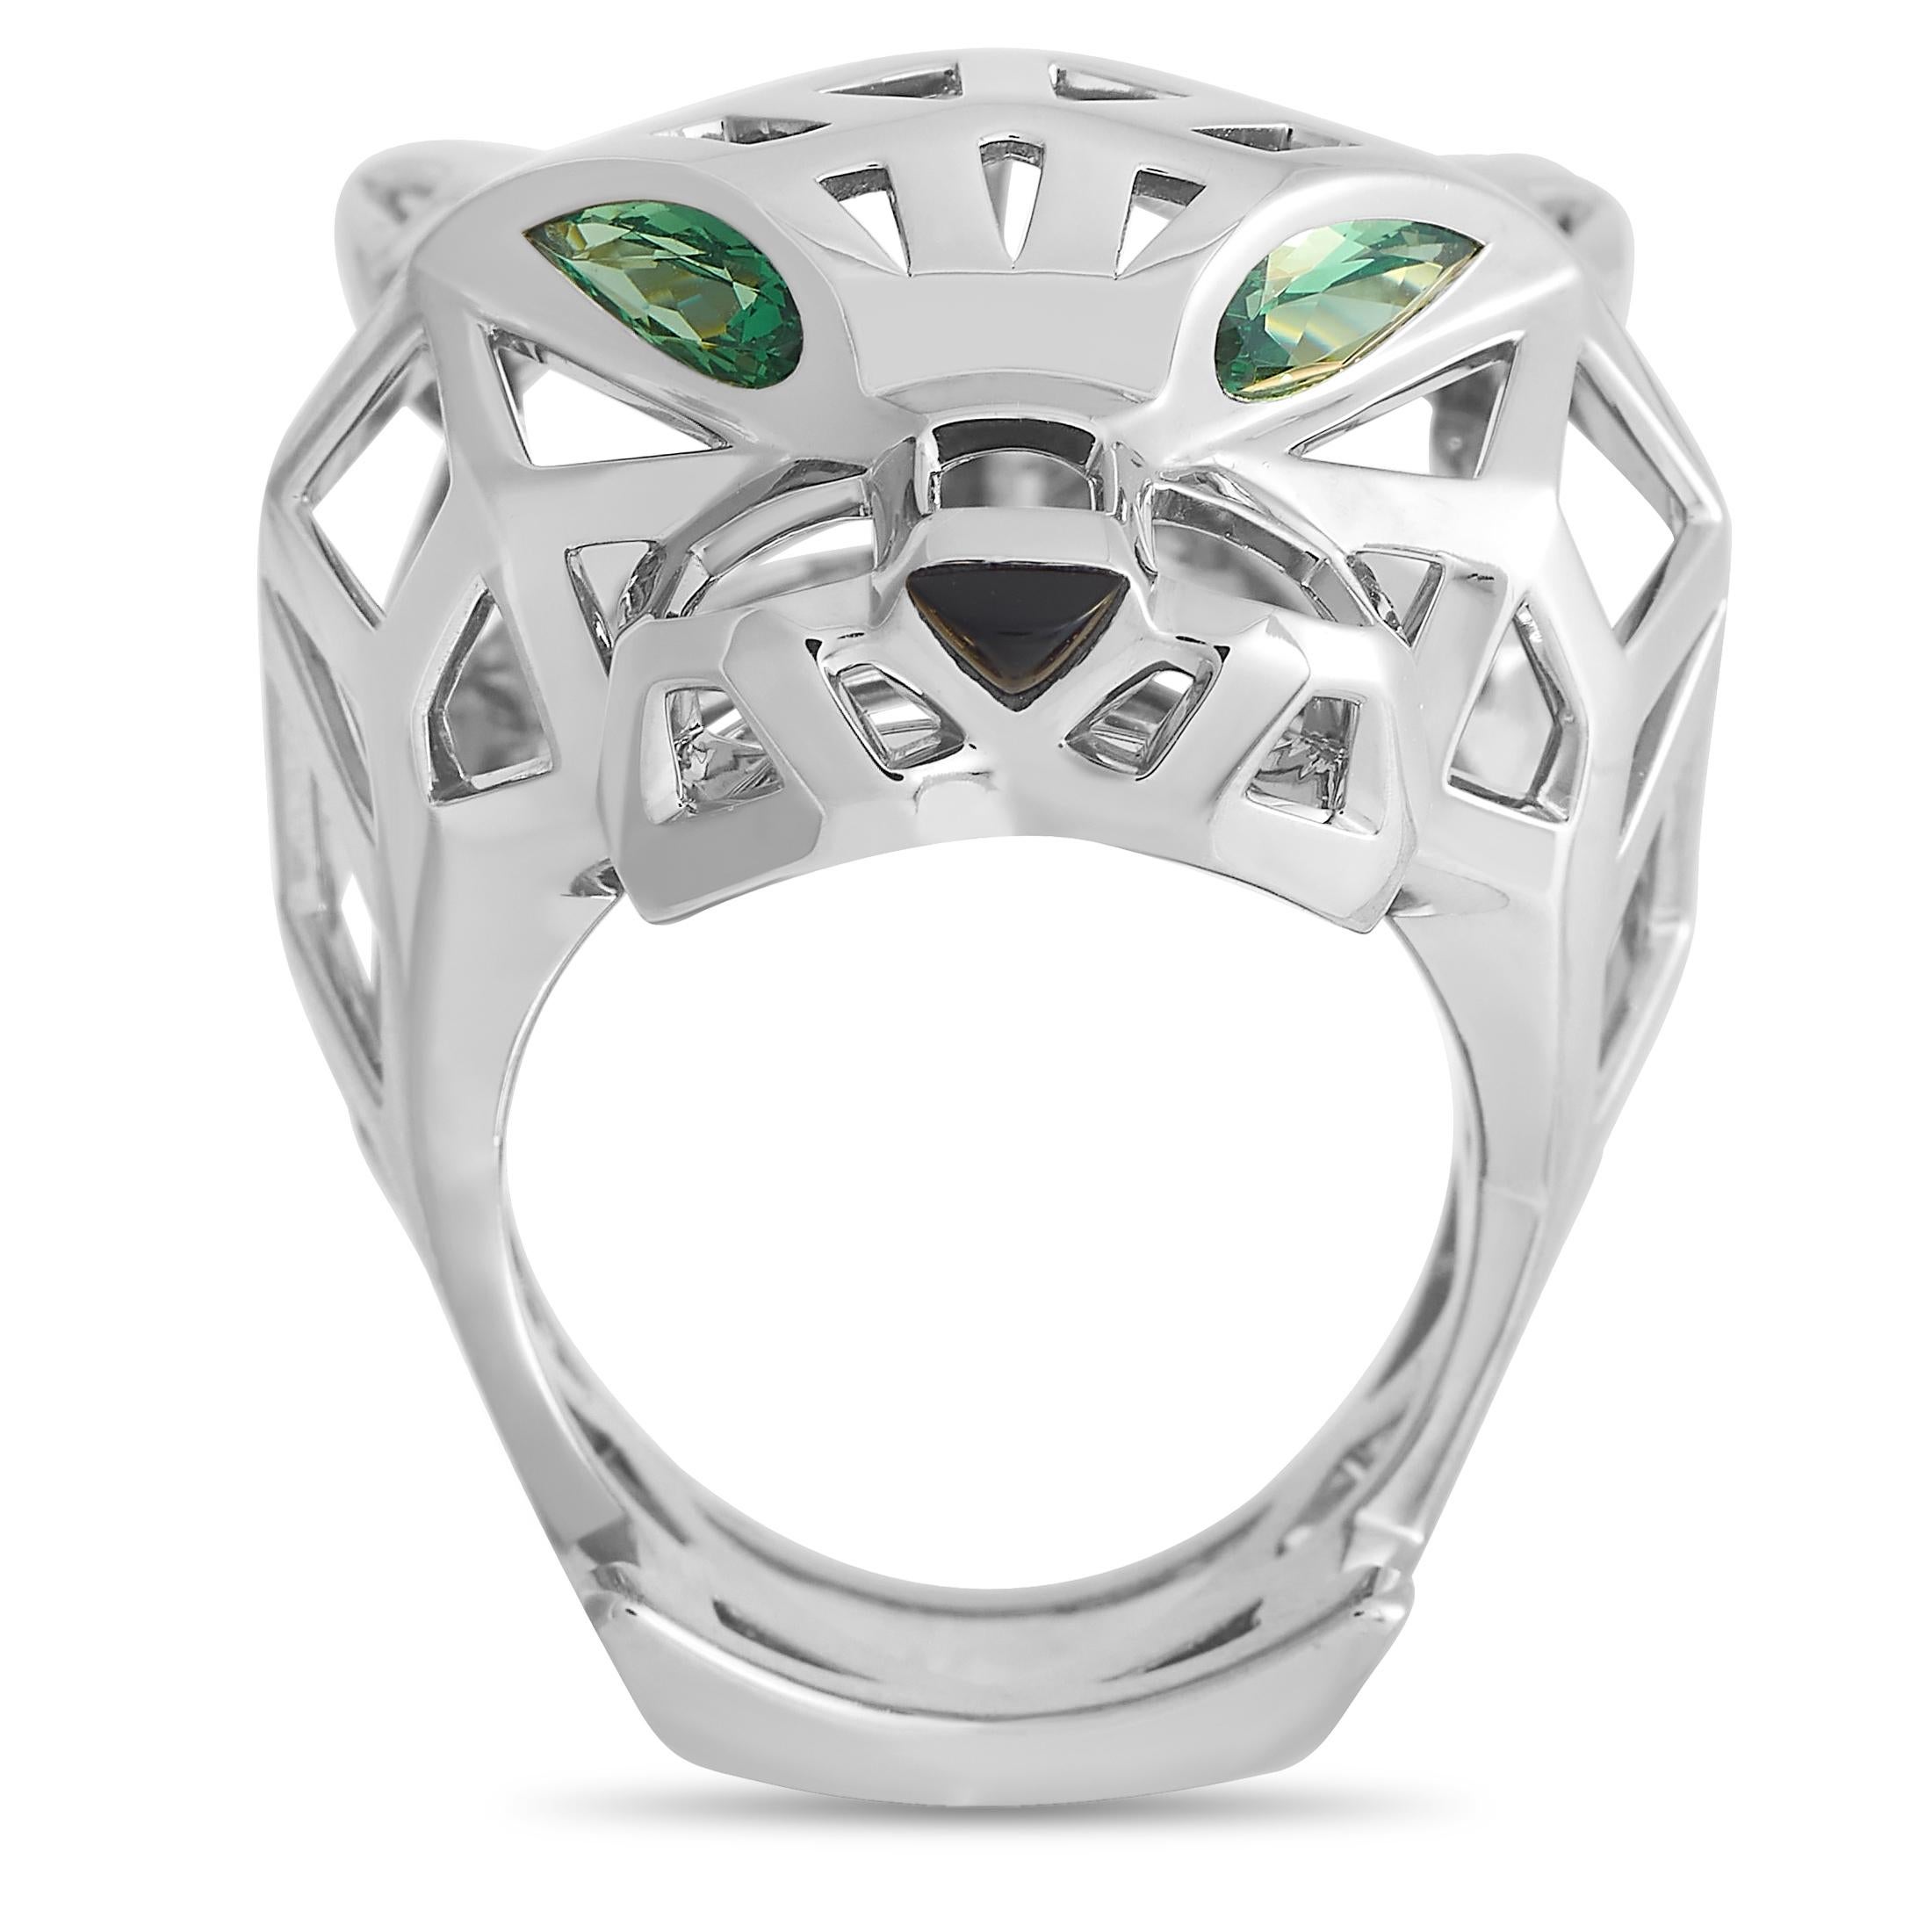 Chic and incredibly contemporary in design, this Cariter Panthere ring is unlike anything you’ve seen before. The iconic panther motif is highlighted by a negative space and comes to life thanks to shimmering gemstone “eyes.” A 7mm wide band and a